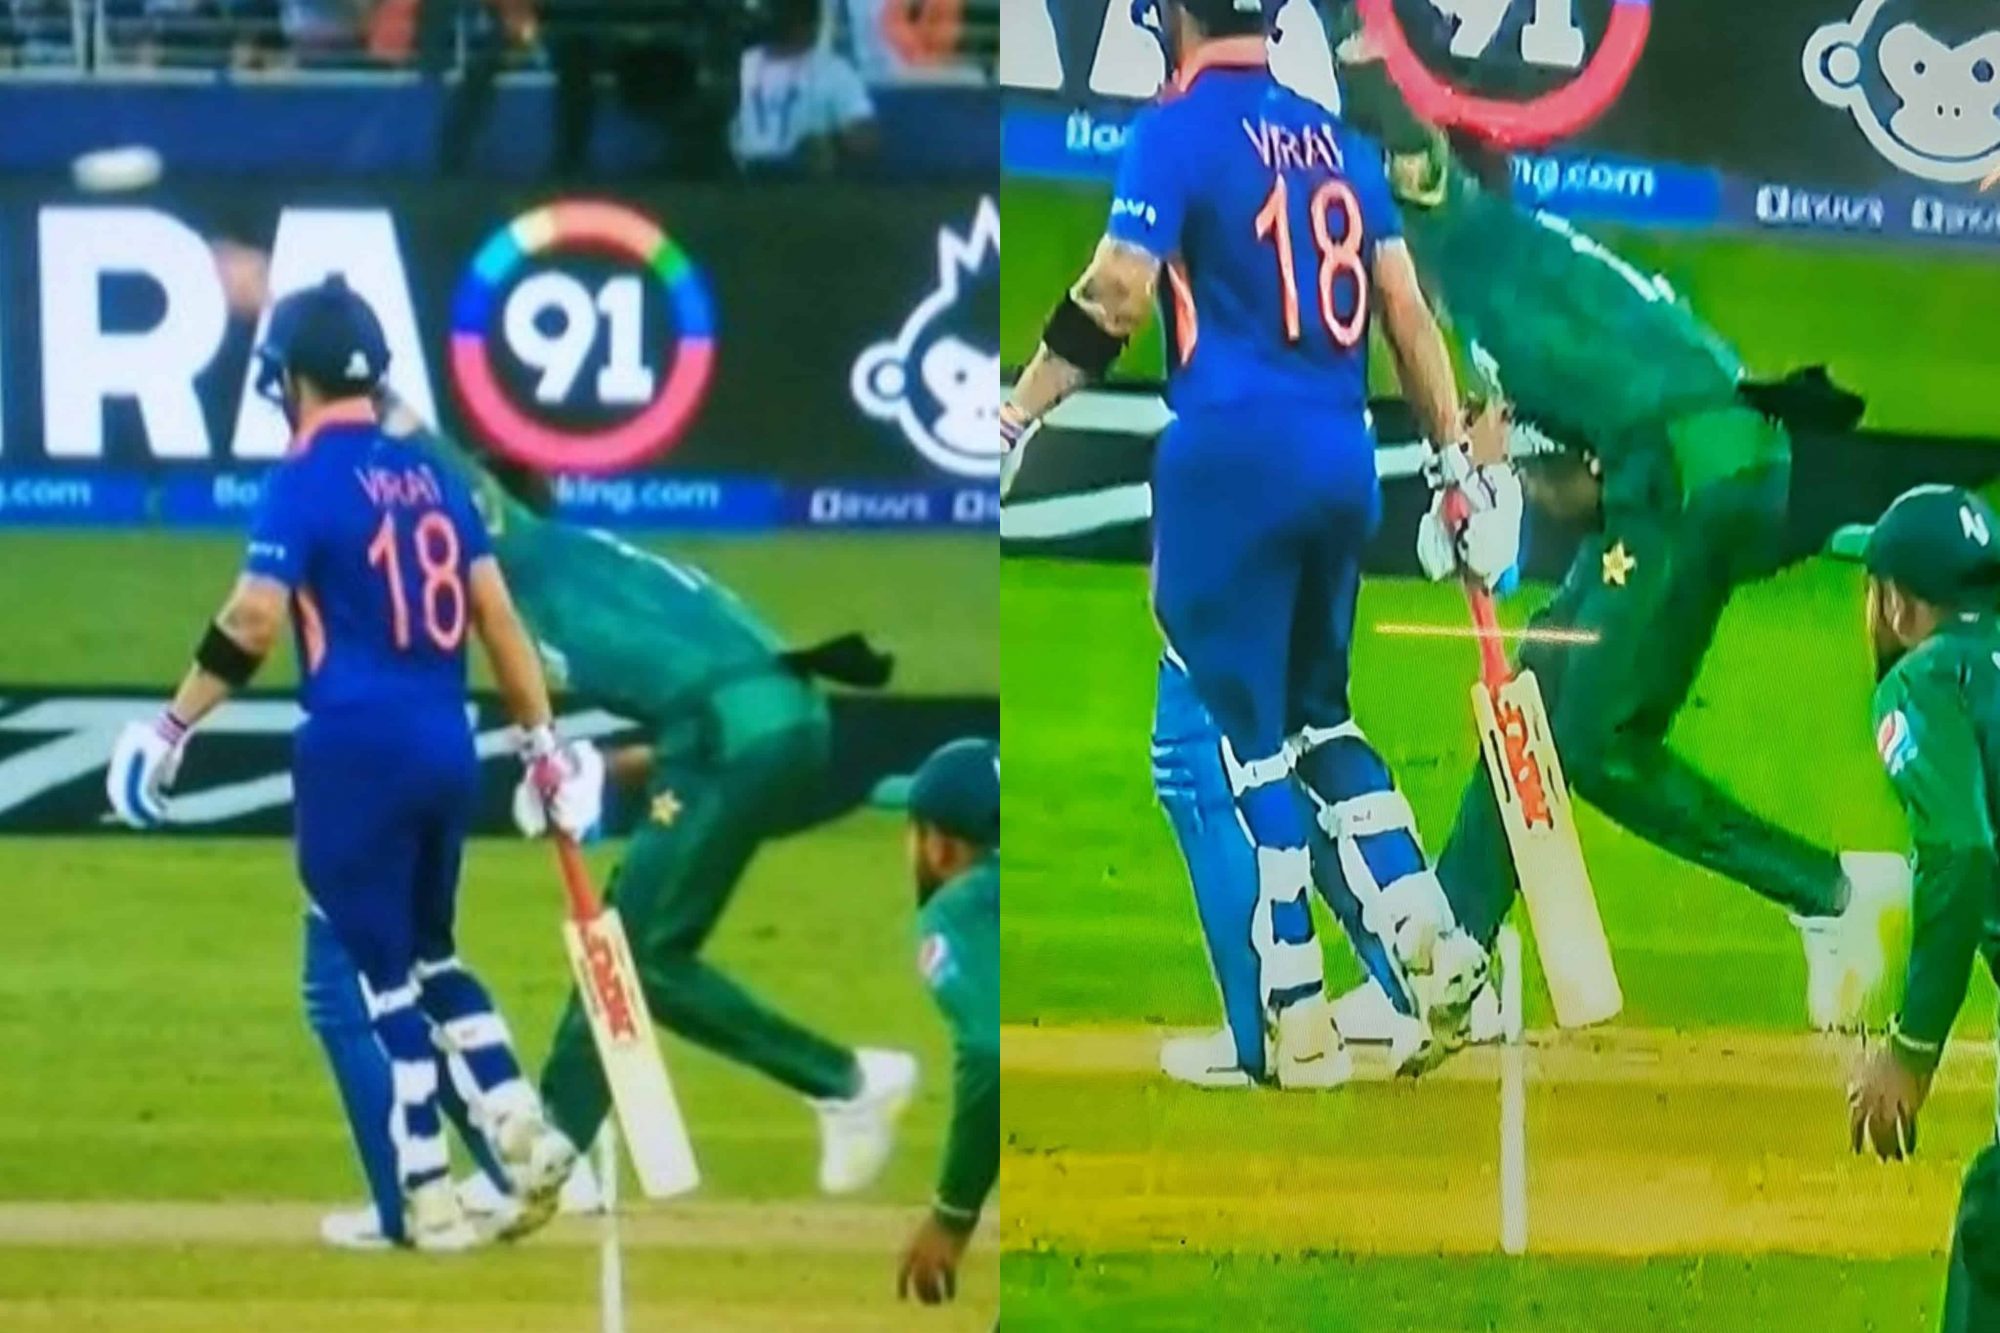 "How in the world is this not a no ball?" - Twitter Questioning KL Rahul's Dismissal Off No-Ball In India vs Pakistan Game